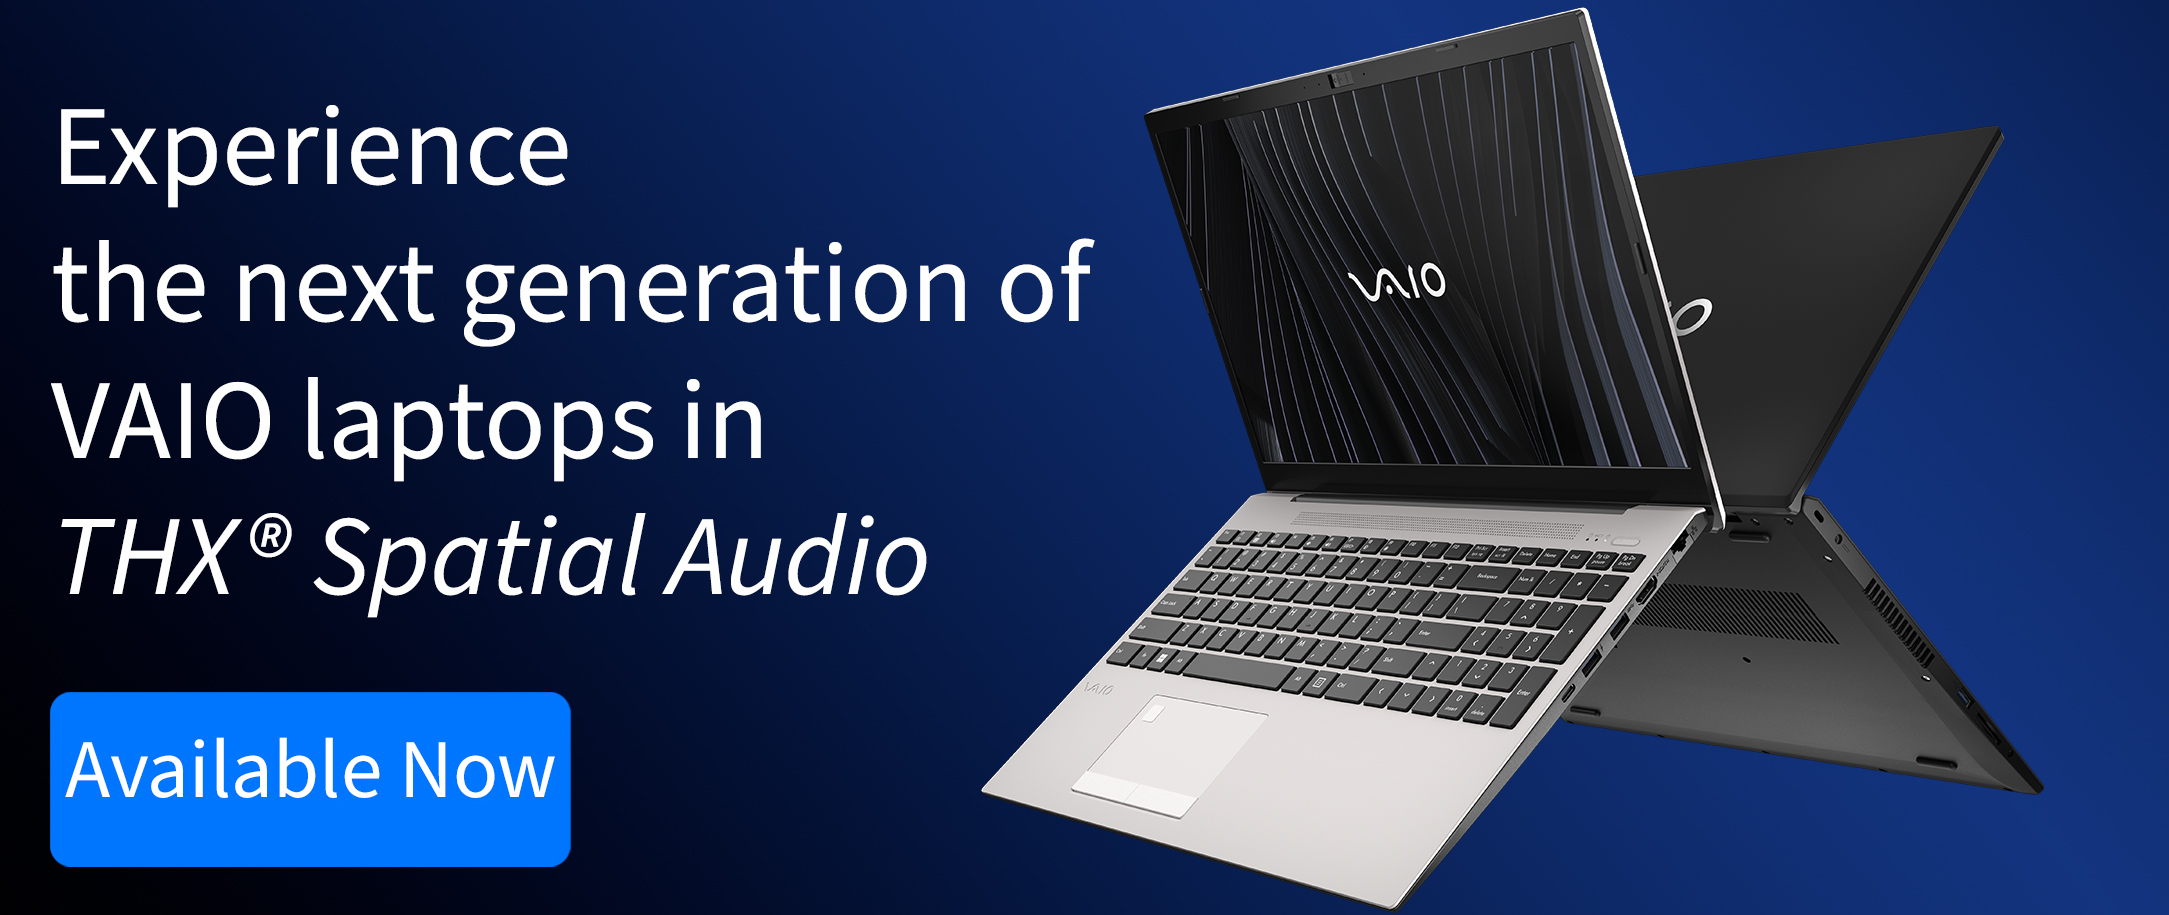 VAIO laptops on a blue and black background